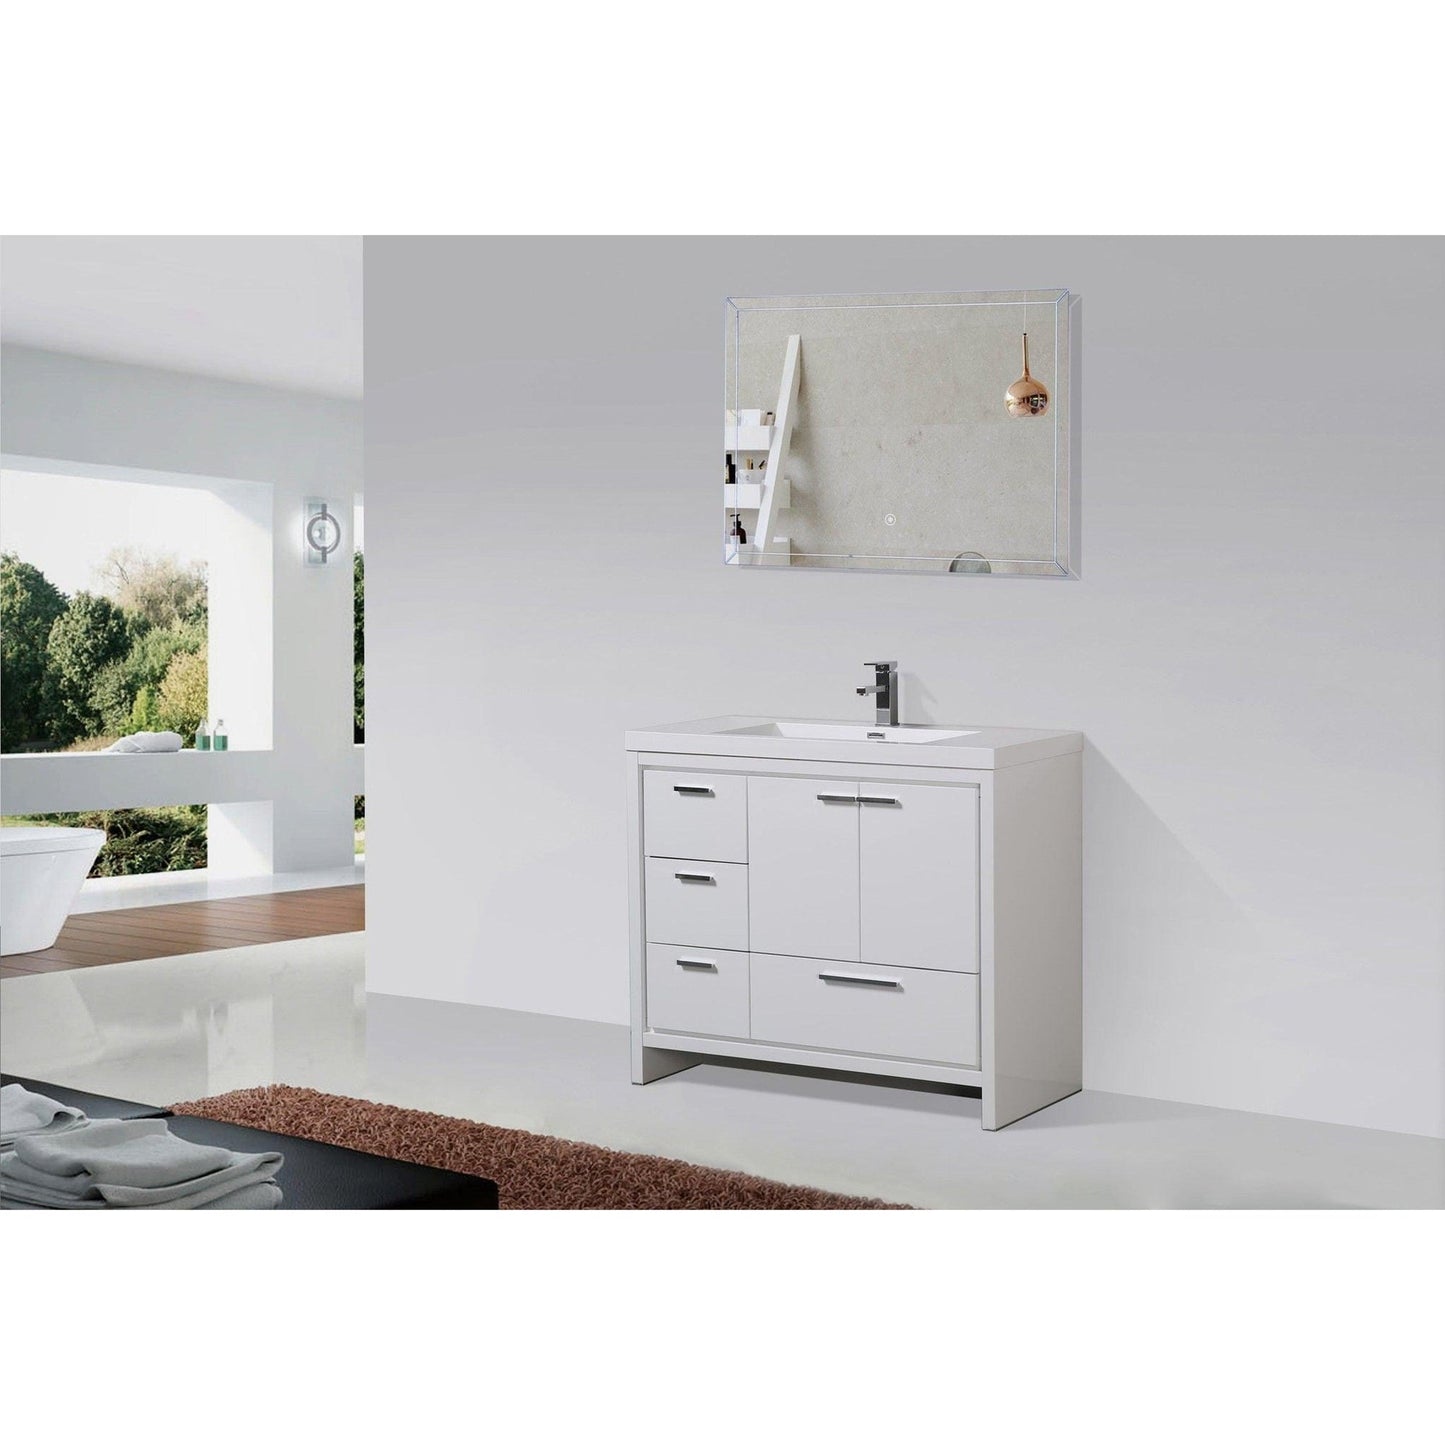 Moreno Bath Dolce 42" High Gloss White Freestanding Vanity With Left Side Drawers and Single Reinforced White Acrylic Sink